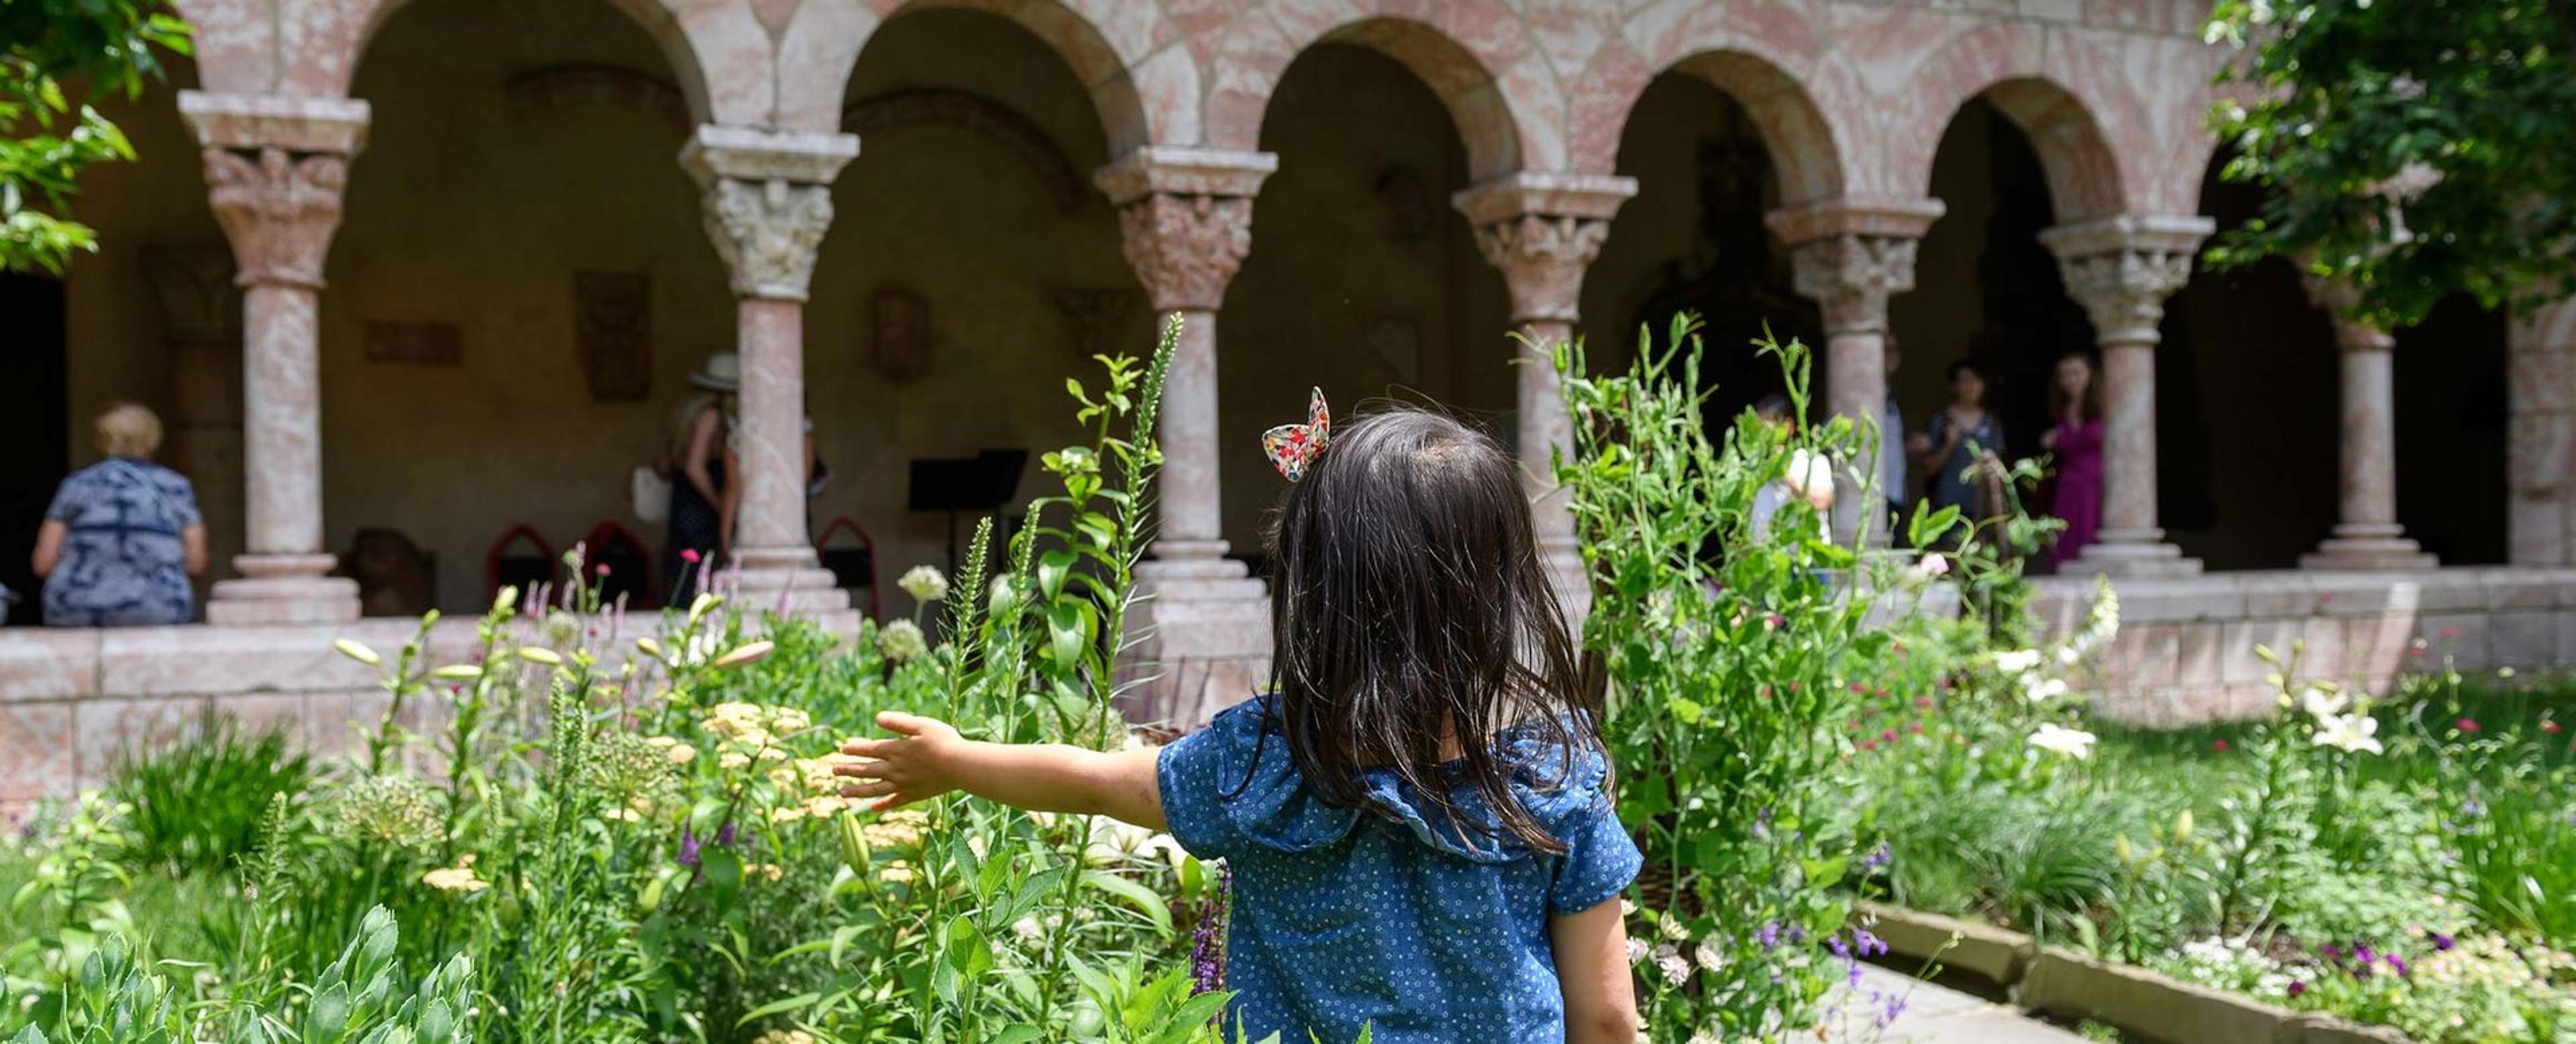 a young girl with her back turned to the camera stands in front of a garden bed in a medieval cloister.